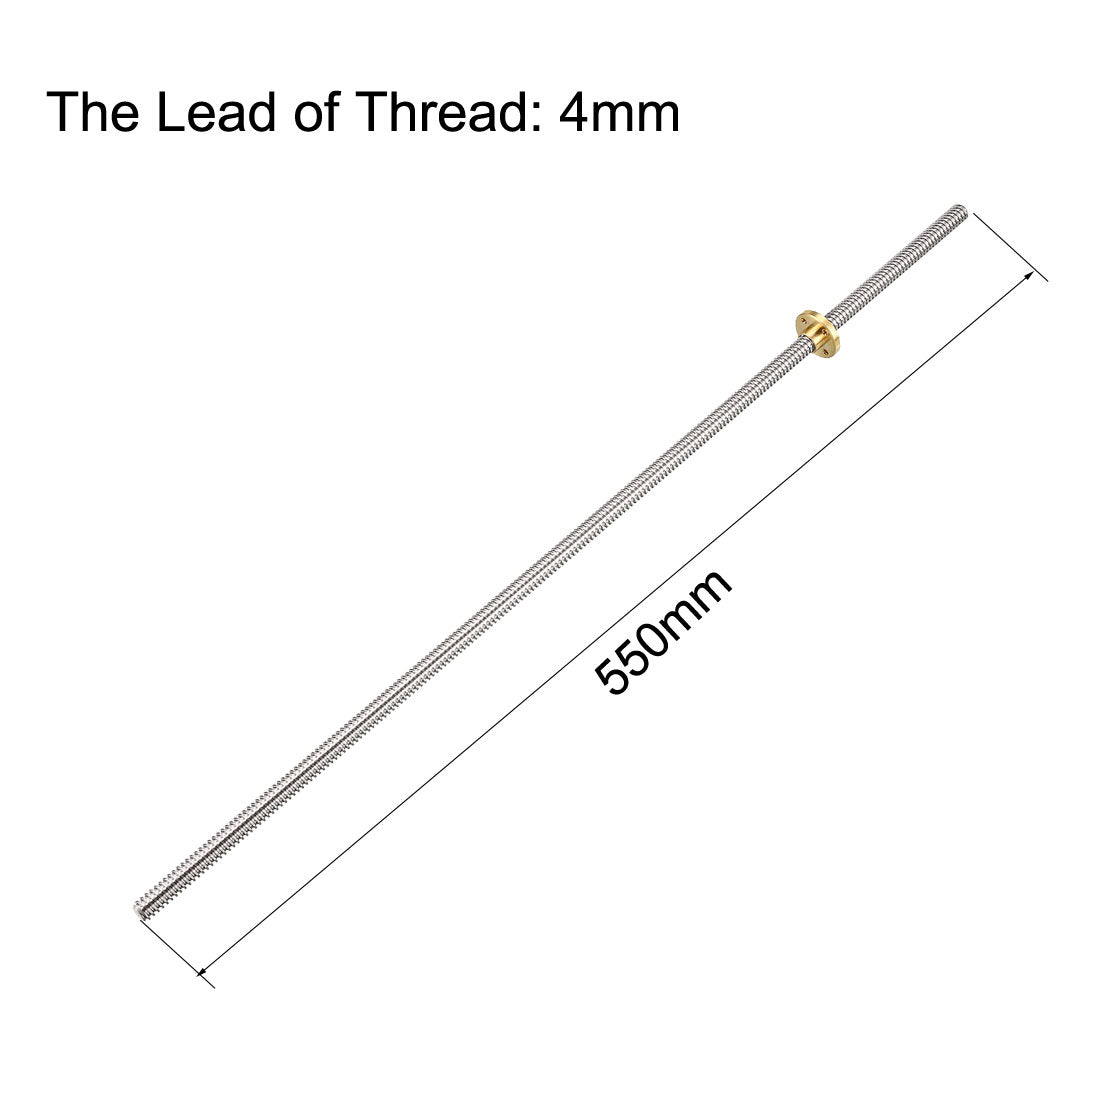 uxcell Uxcell 550mm T8 Pitch 2mm Lead 4mm Lead Screw Rod with Copper Nut for 3D Printer